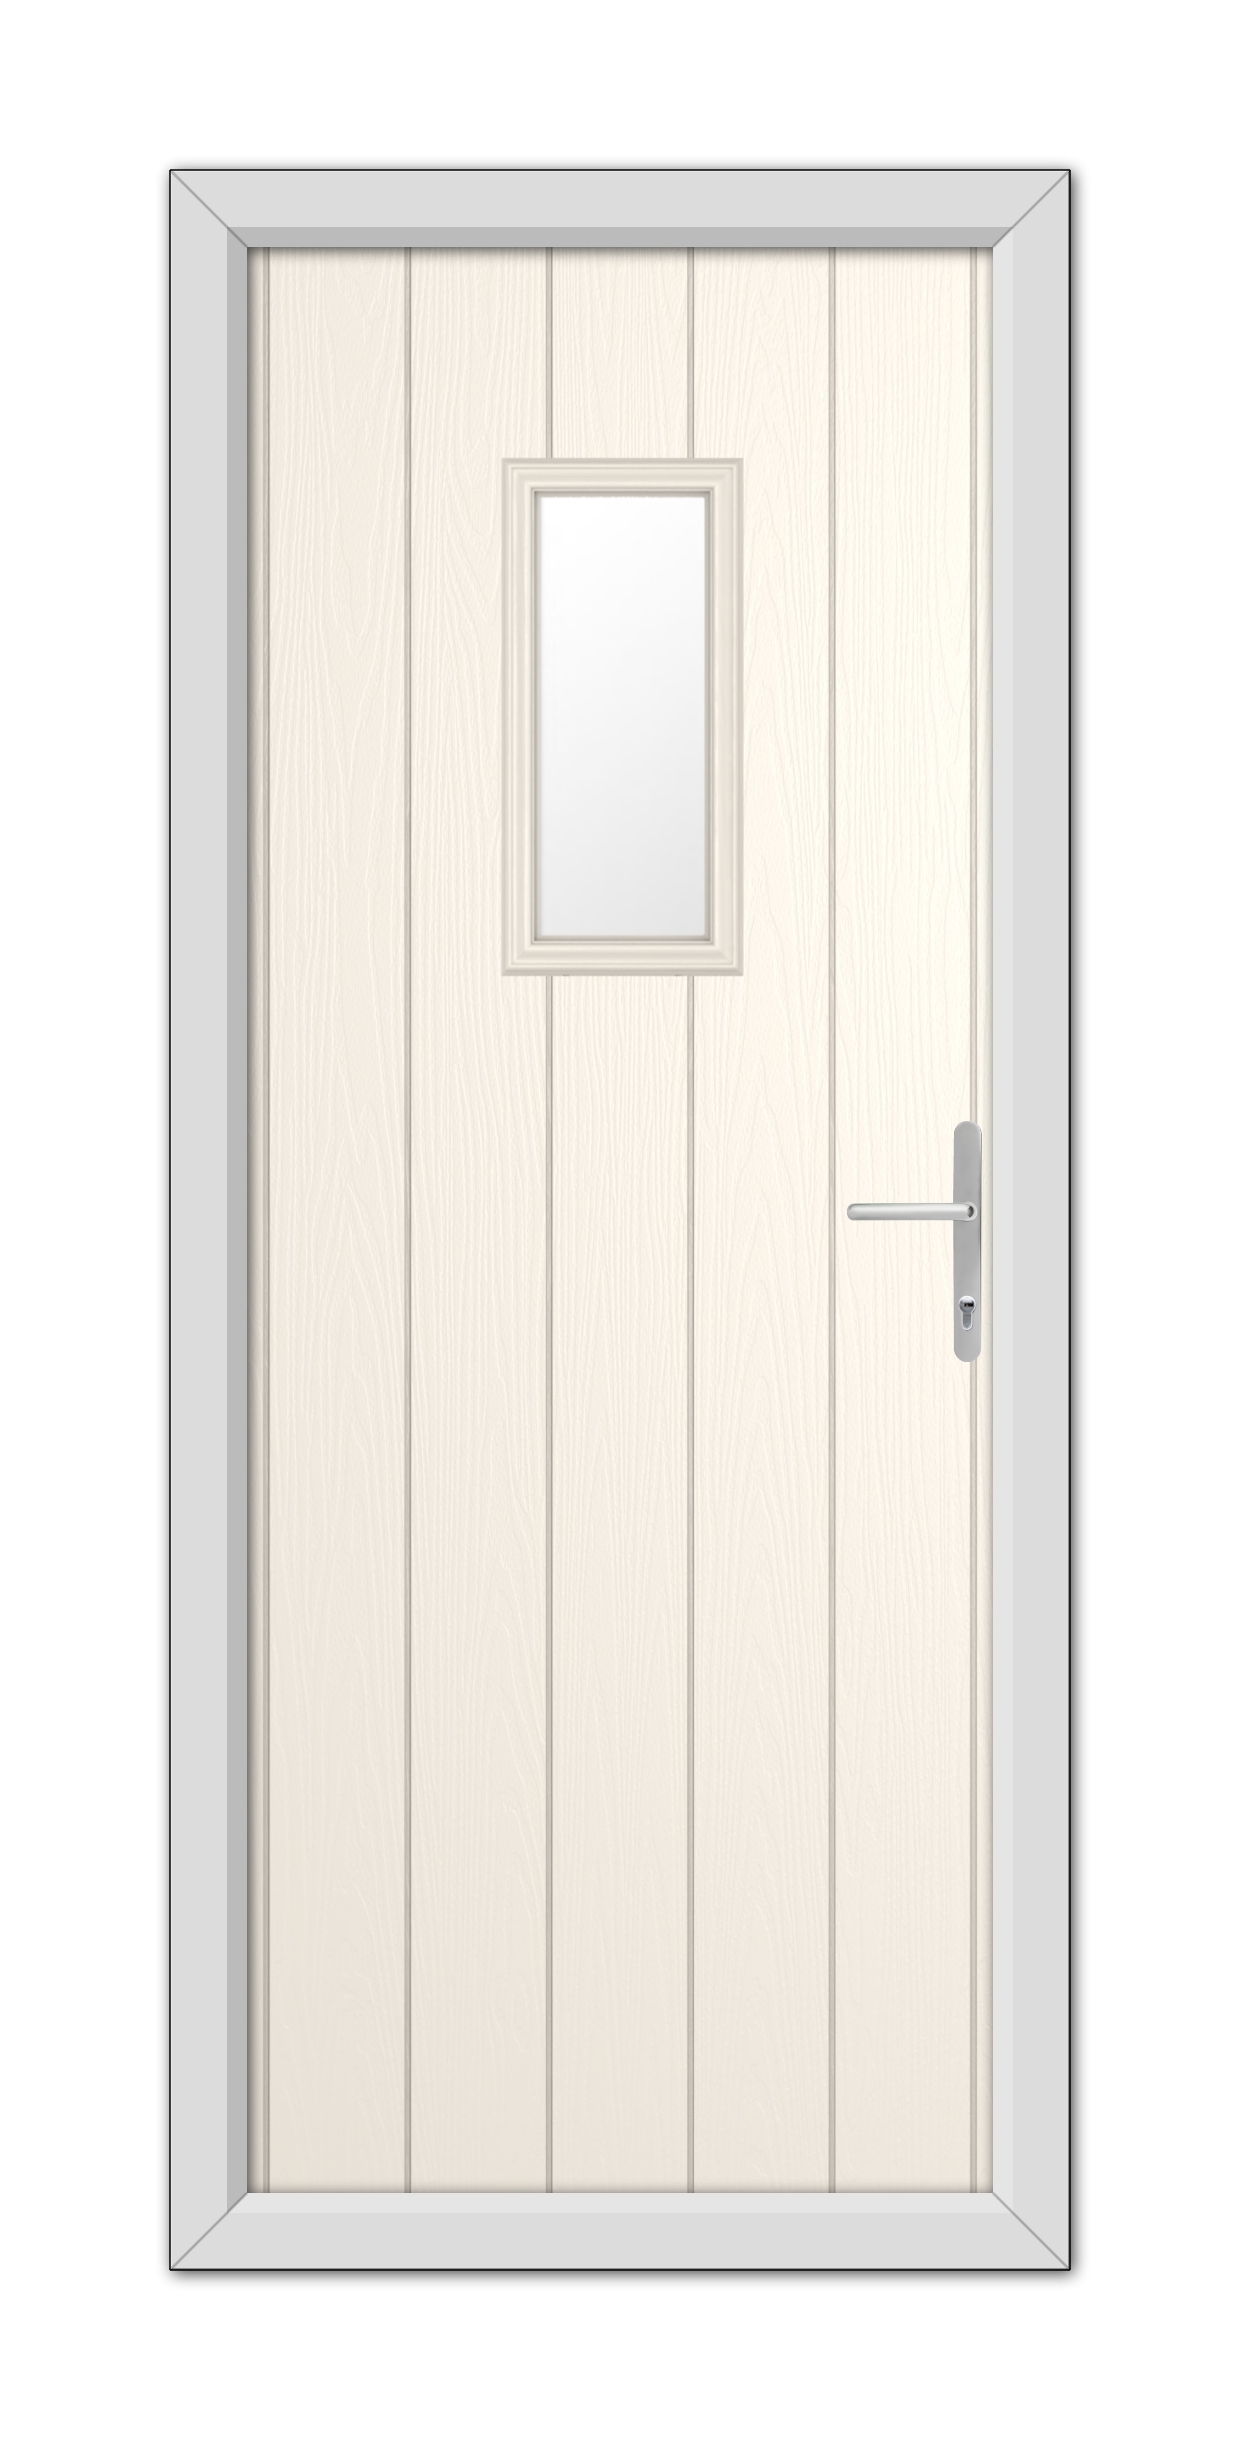 A White Foil Somerset Composite Door 48mm Timber Core with a small square window, framed by a gray doorframe, featuring a modern handle on the right side.